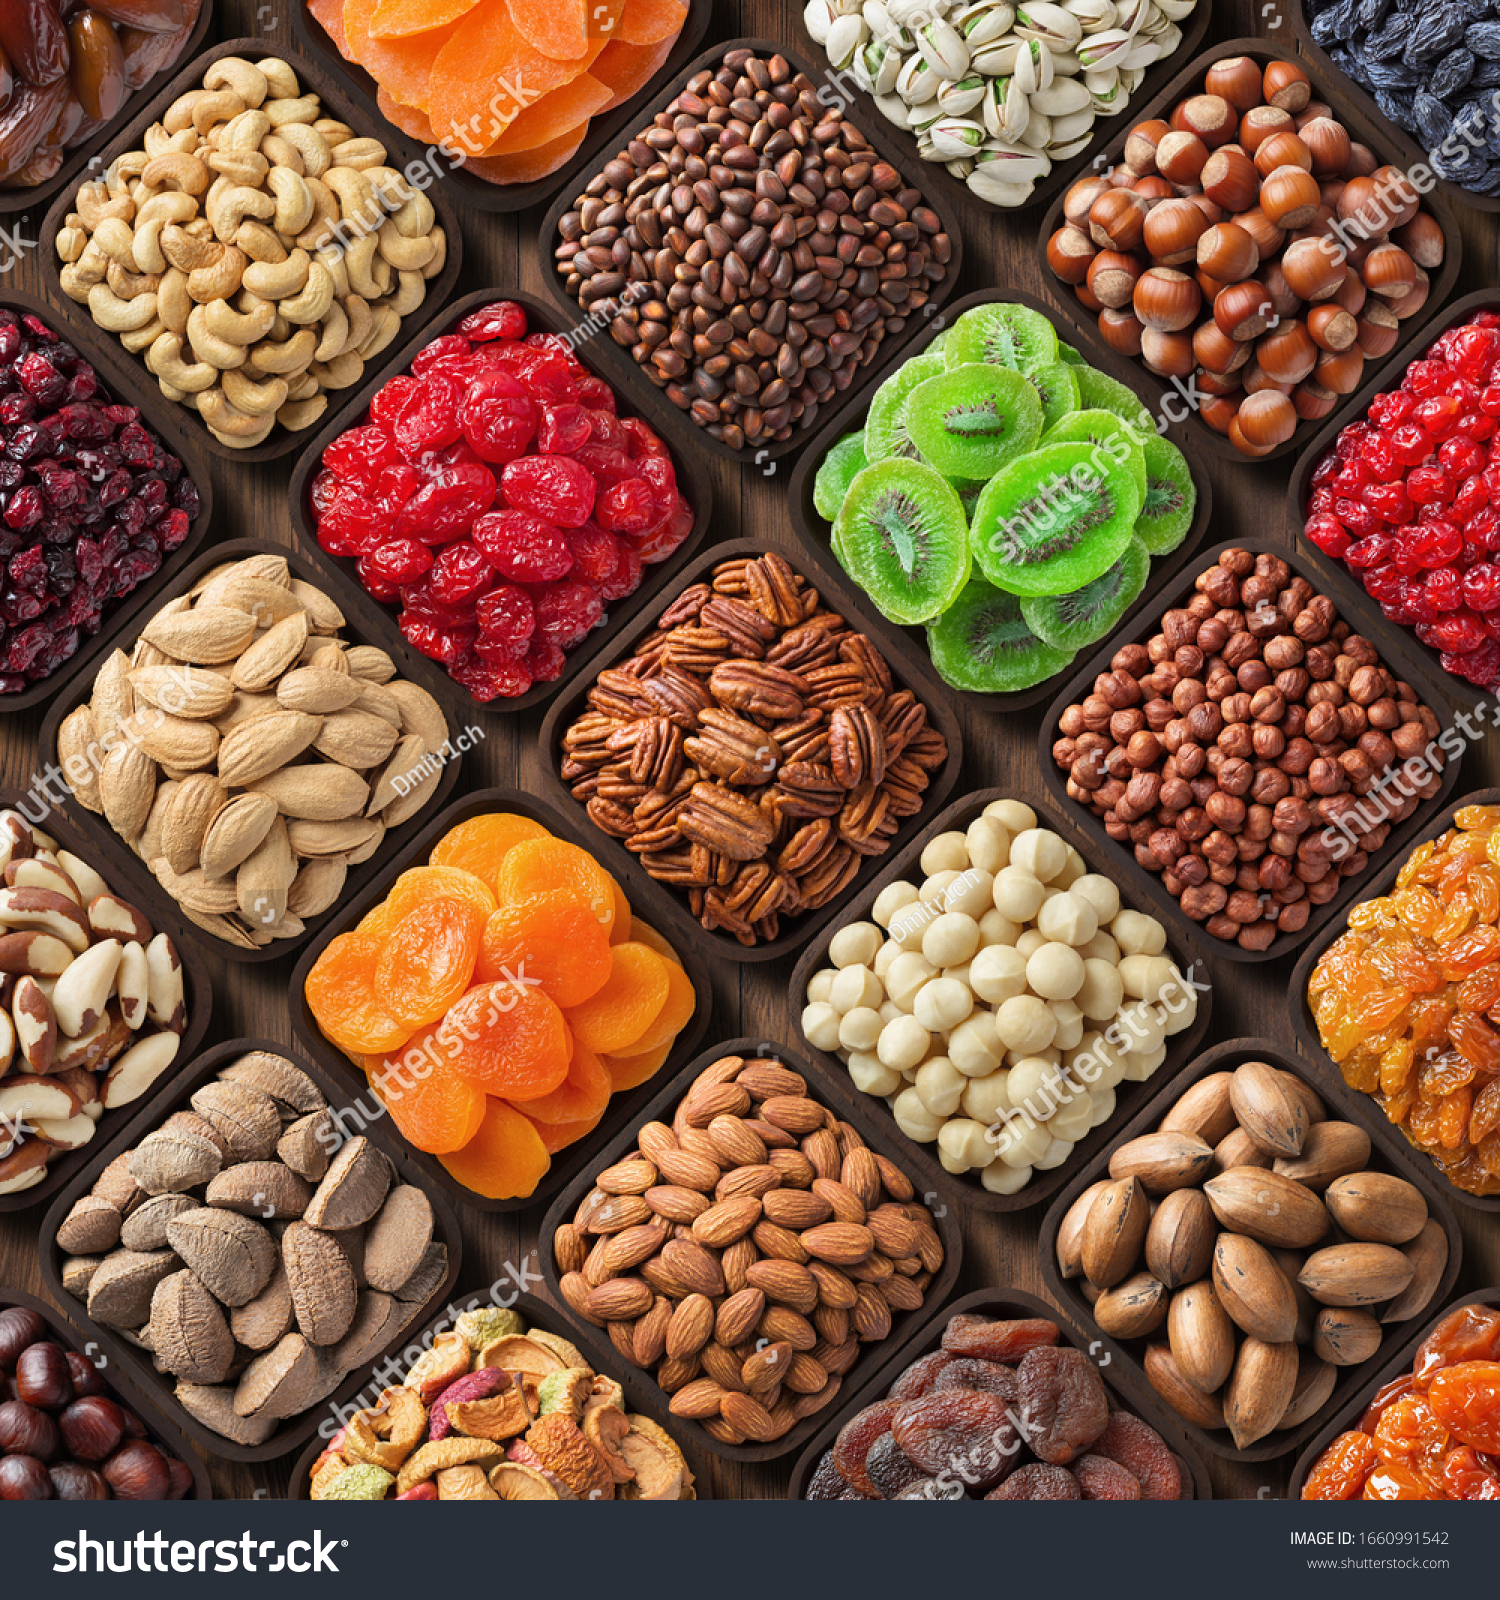 assorted candied berries, dried fruits, nuts and seeds, top view. healthy food background #1660991542